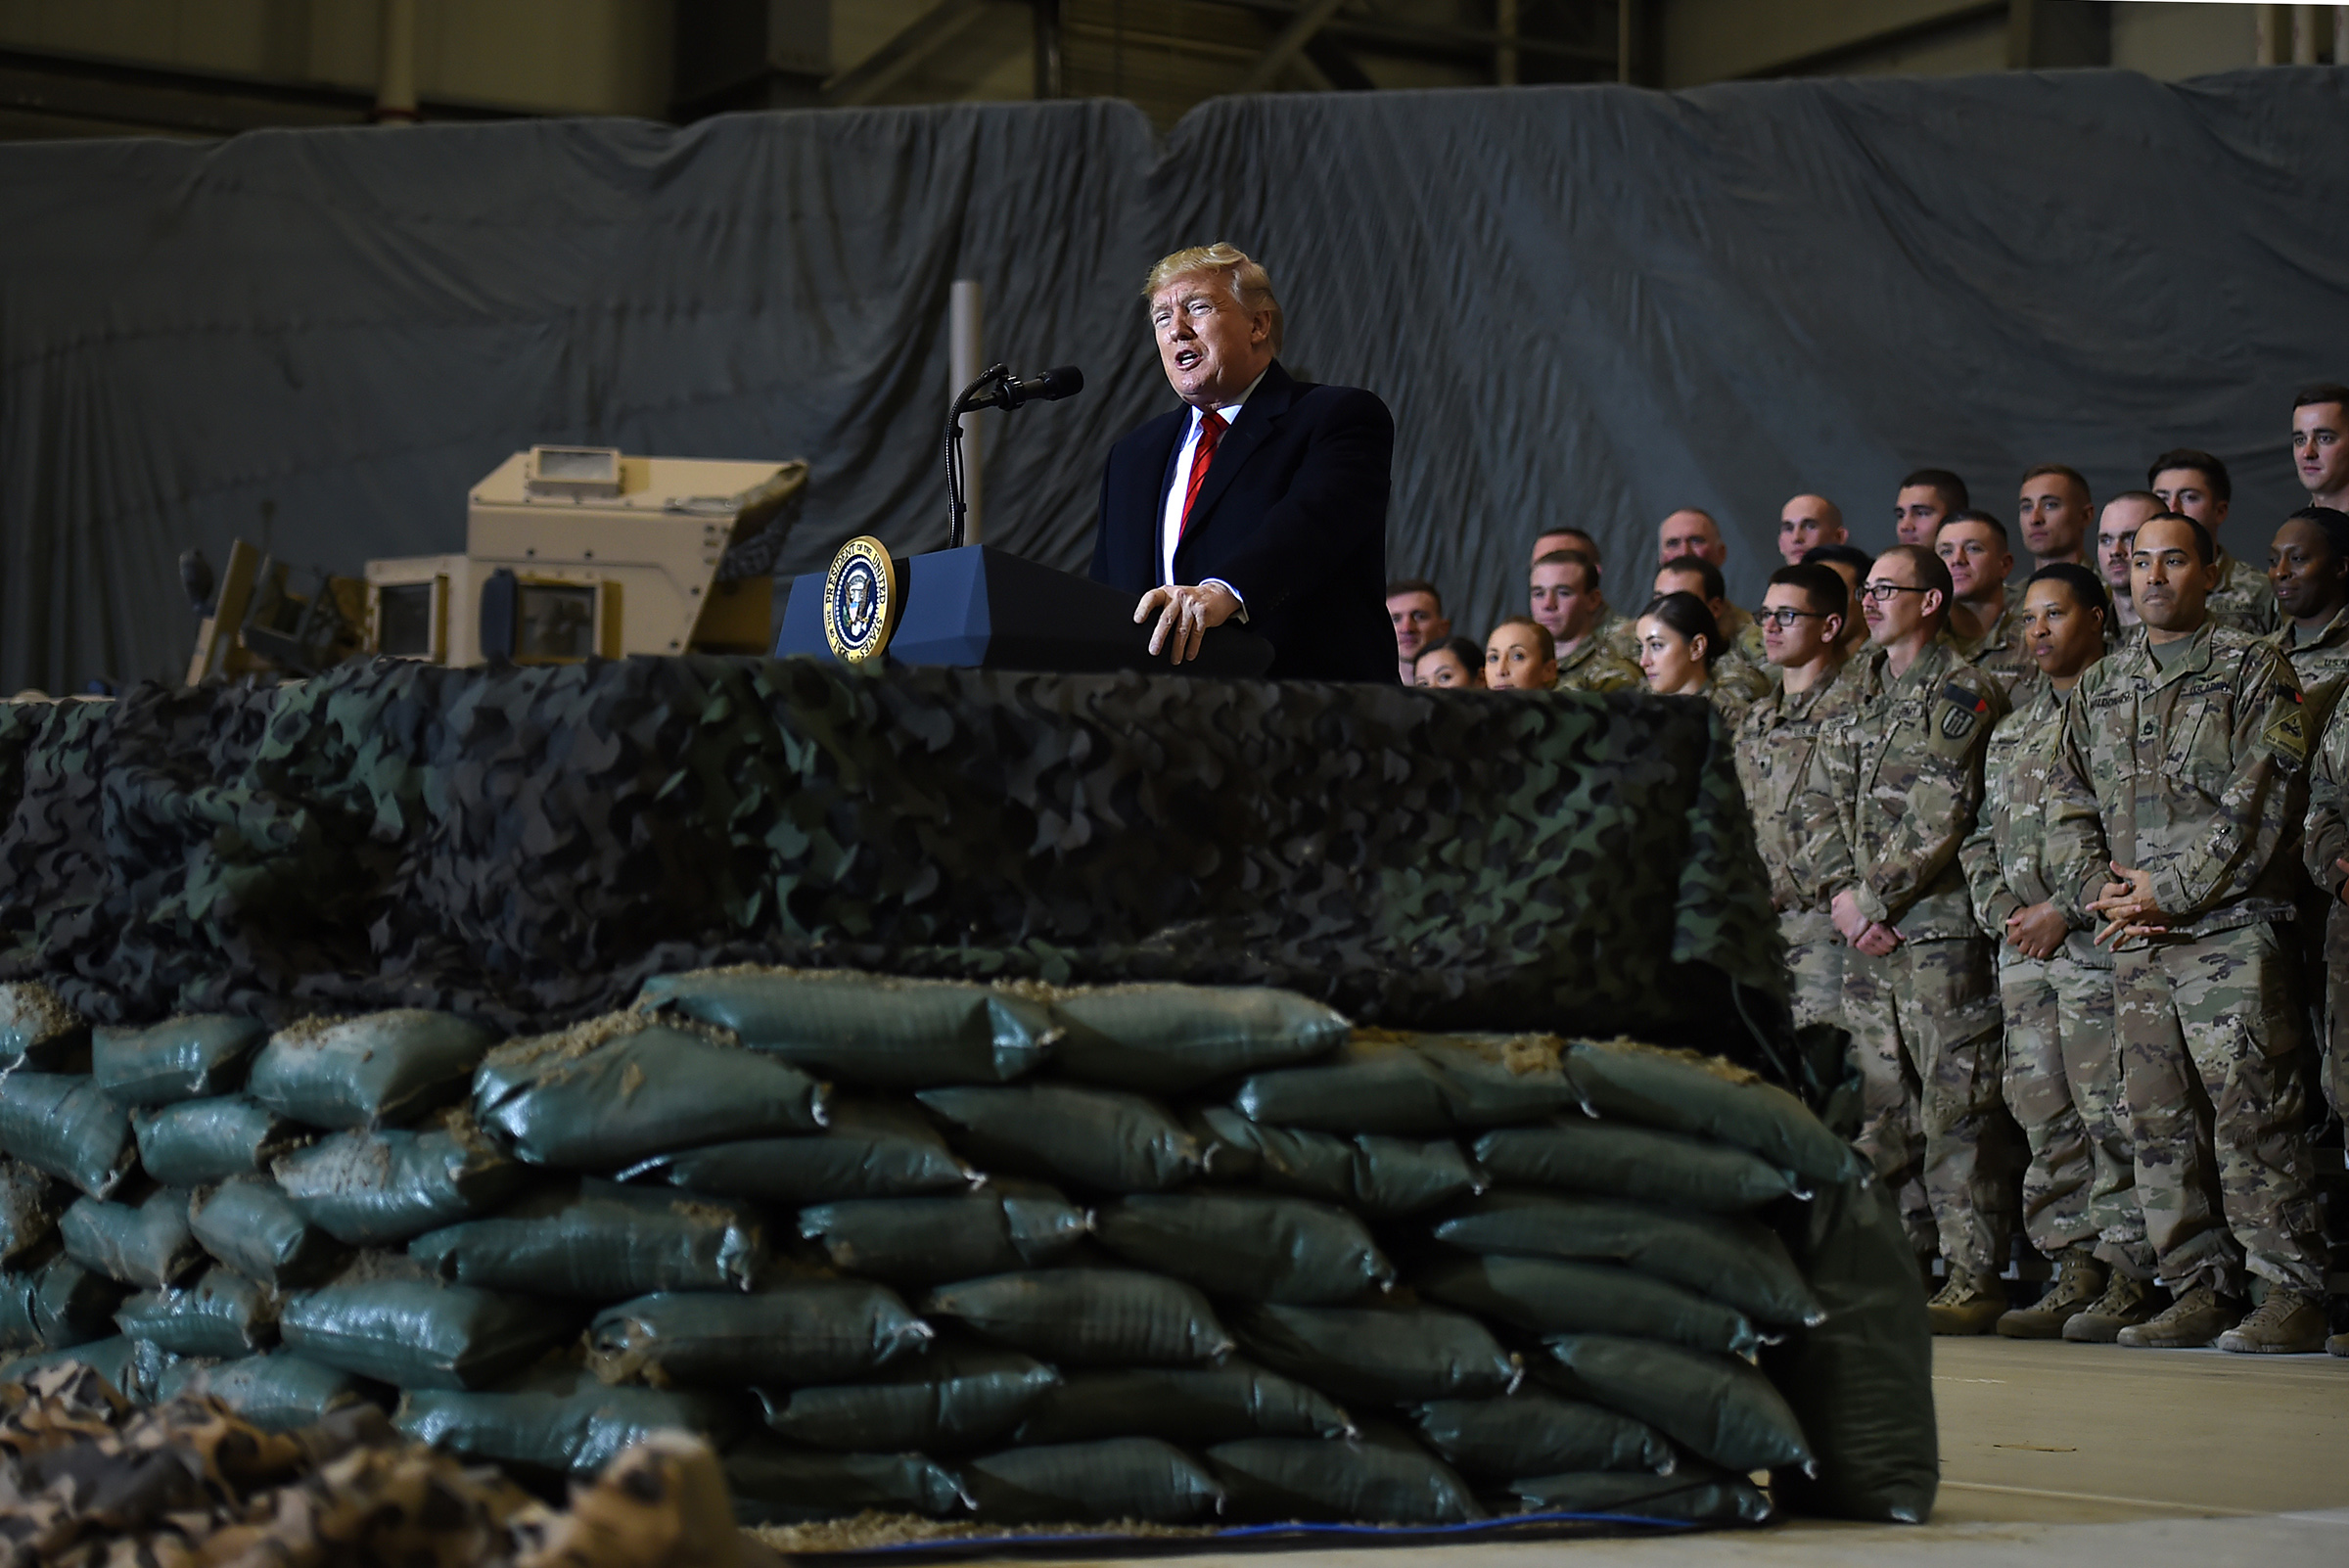 US President Donald Trump speaks to the troops during a surprise Thanksgiving day visit at Bagram Air Field in Afghanistan on Nov. 28, 2019. (Olivier Douliery—AFP via Getty Images)